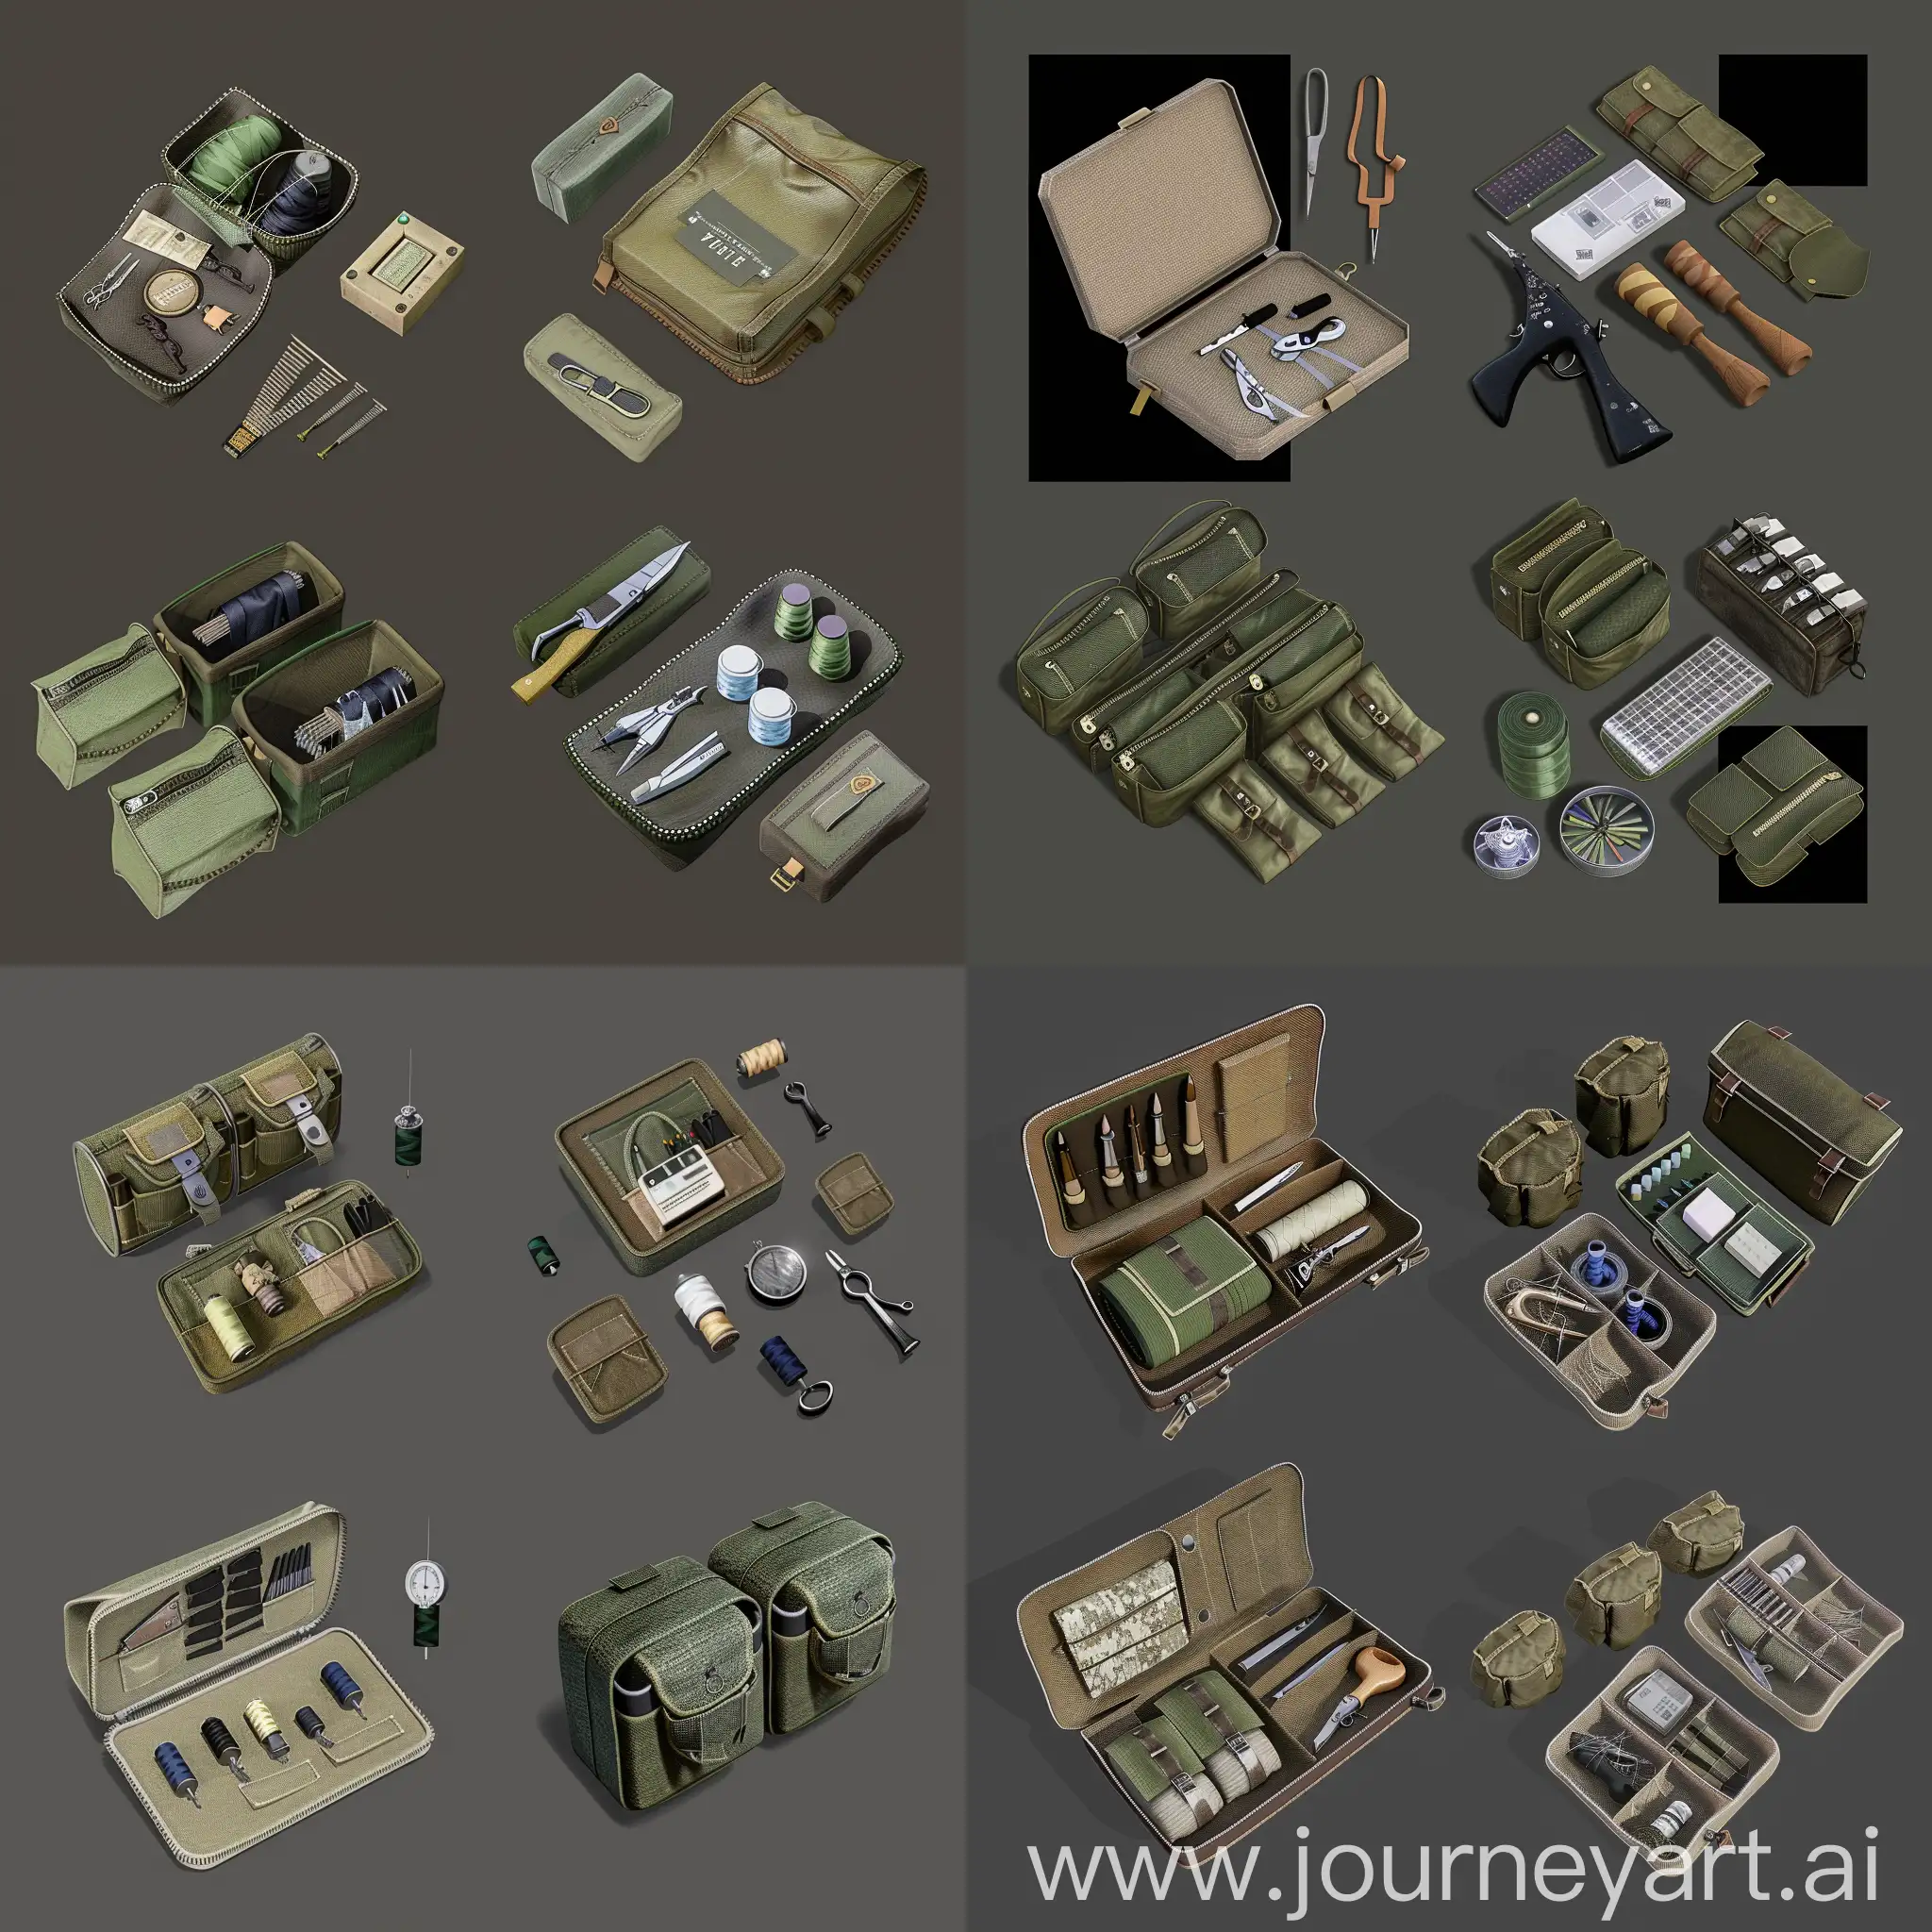 https://i.postimg.cc/13dDZqSL/image.png https://i.postimg.cc/XYksmDM1/image.png realistic photo of isometric set, old vintage military sewing kit stored in pouches, style of unreal engine 3d render, ultrarealistic style, isometric set, spritesheet --style raw --chaos 10 --iw 2